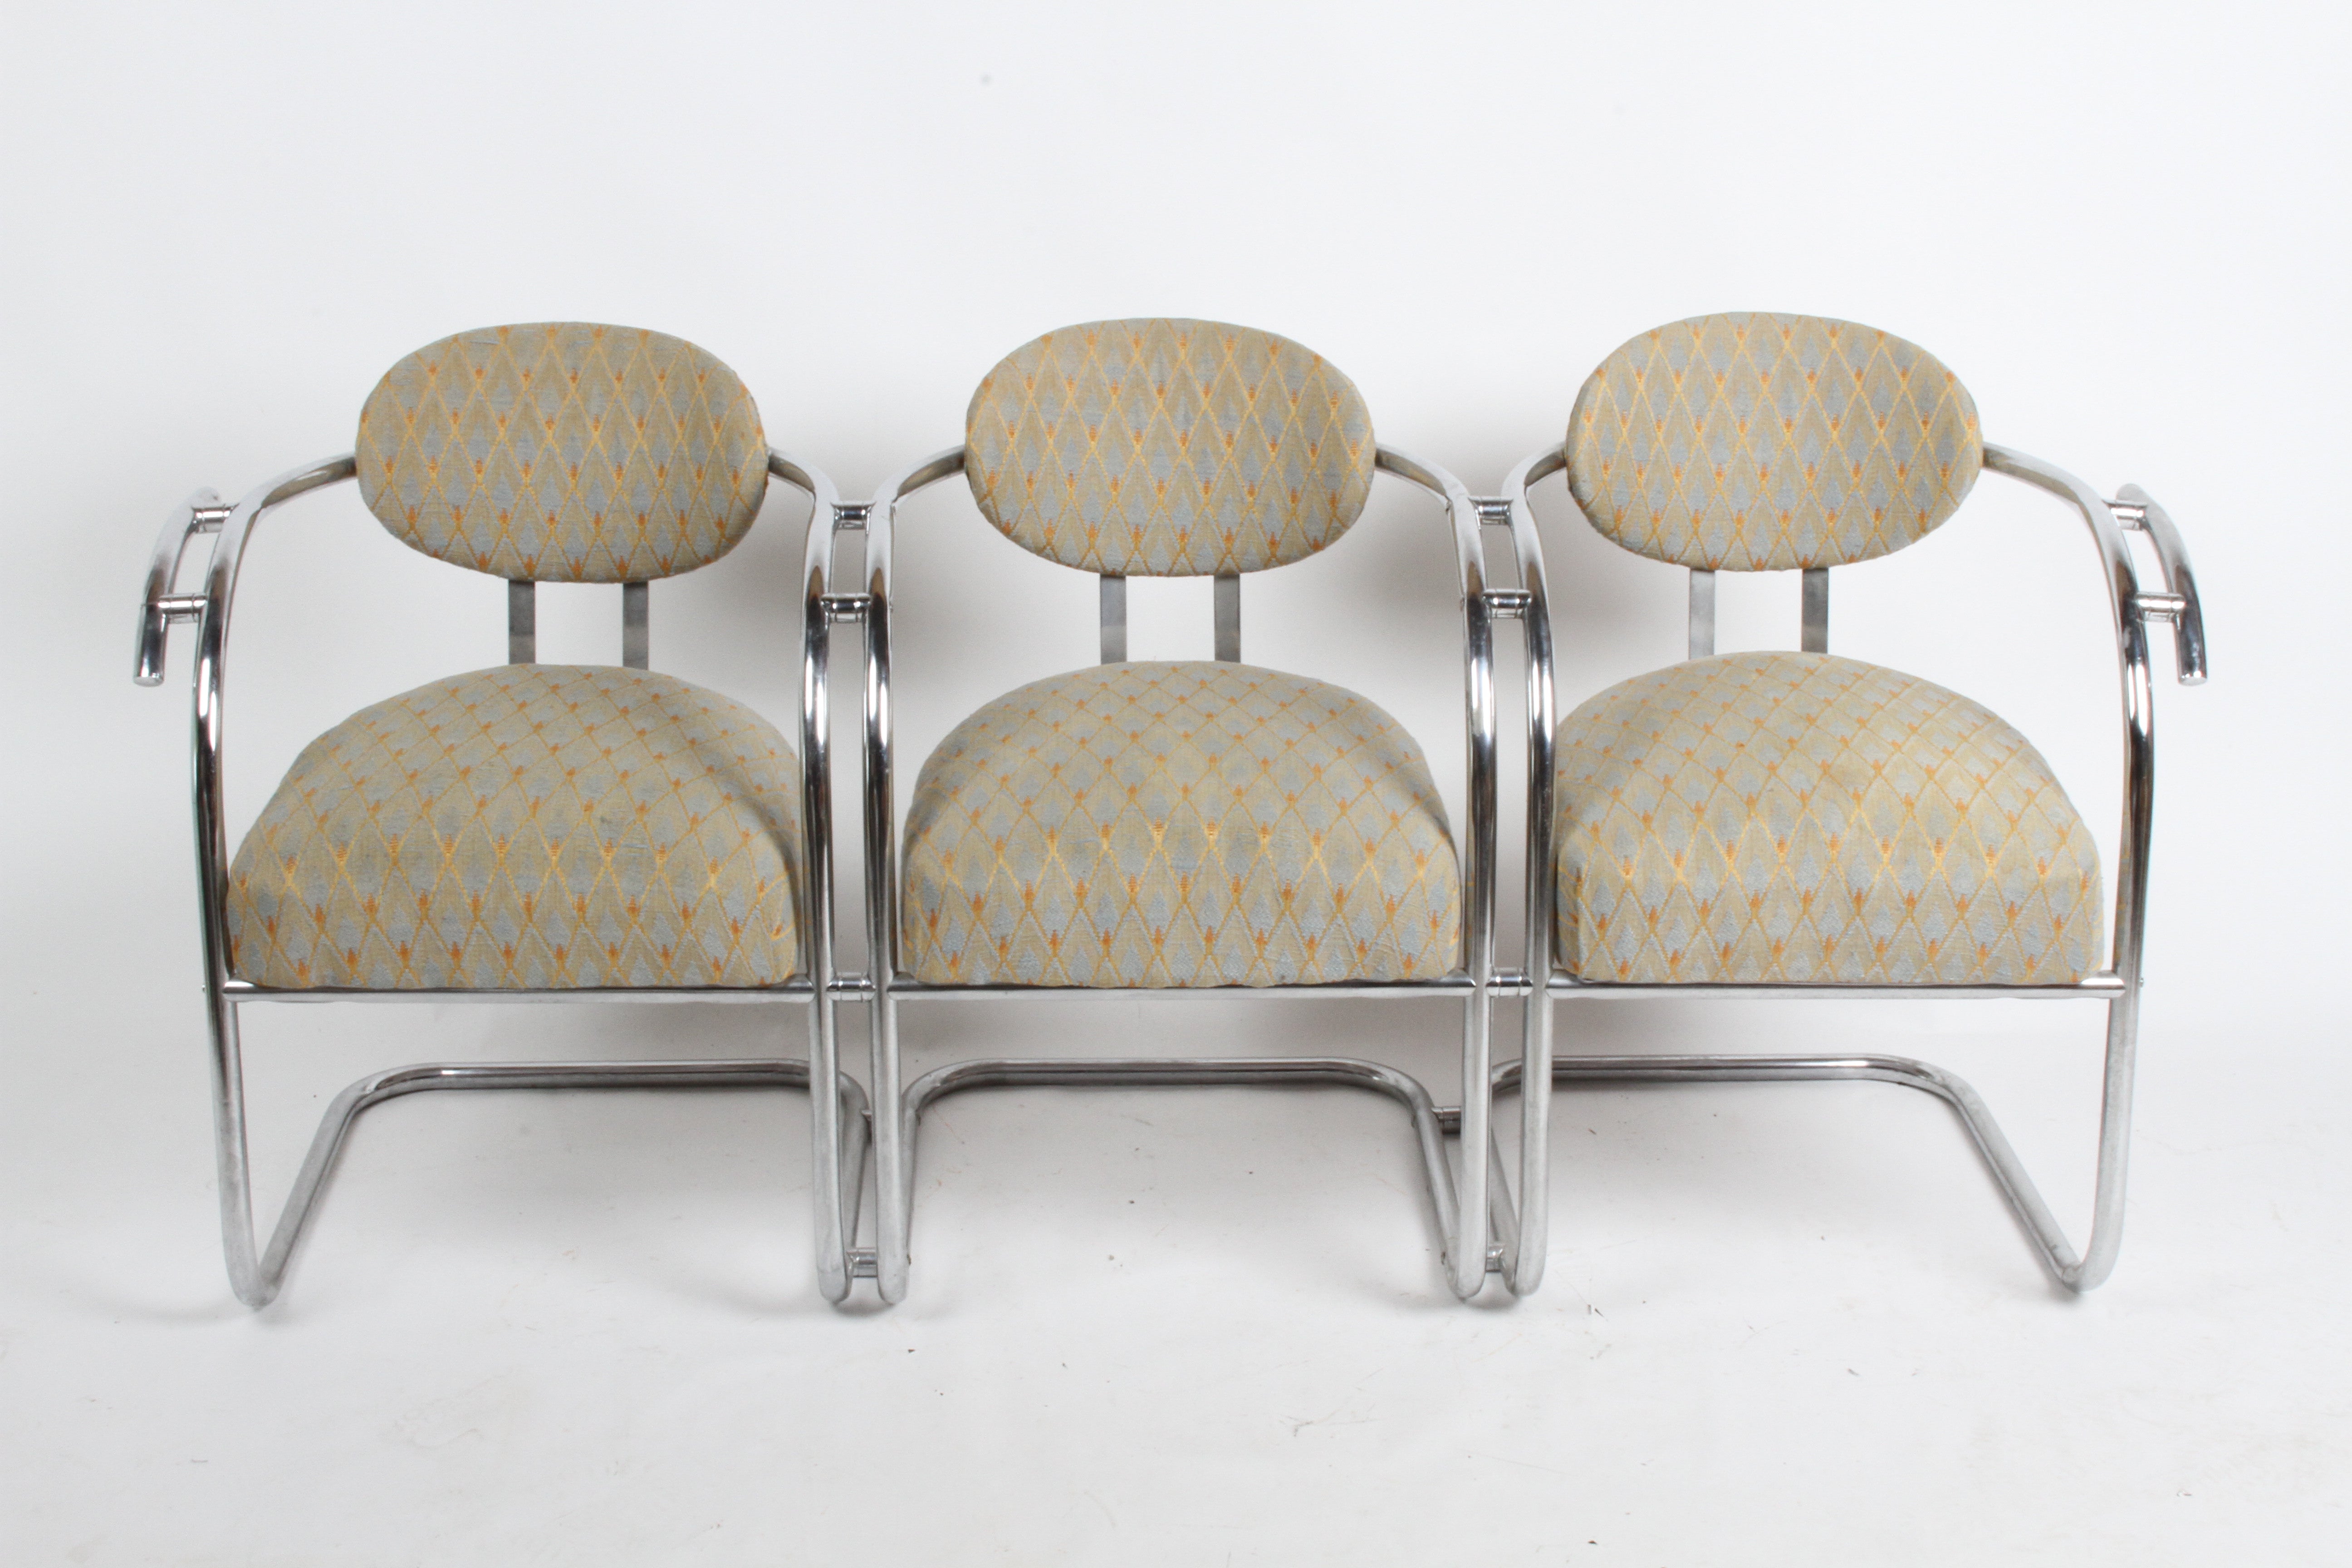 Unique streamline tubular chrome Art Deco tandem 3-seater with arms and upholstered seats and backs, in the style of Kem Weber or Wolfgang Hoffmann for Howell Manufacturing. Older upholstery on springs, chrome in great condition, could use a light